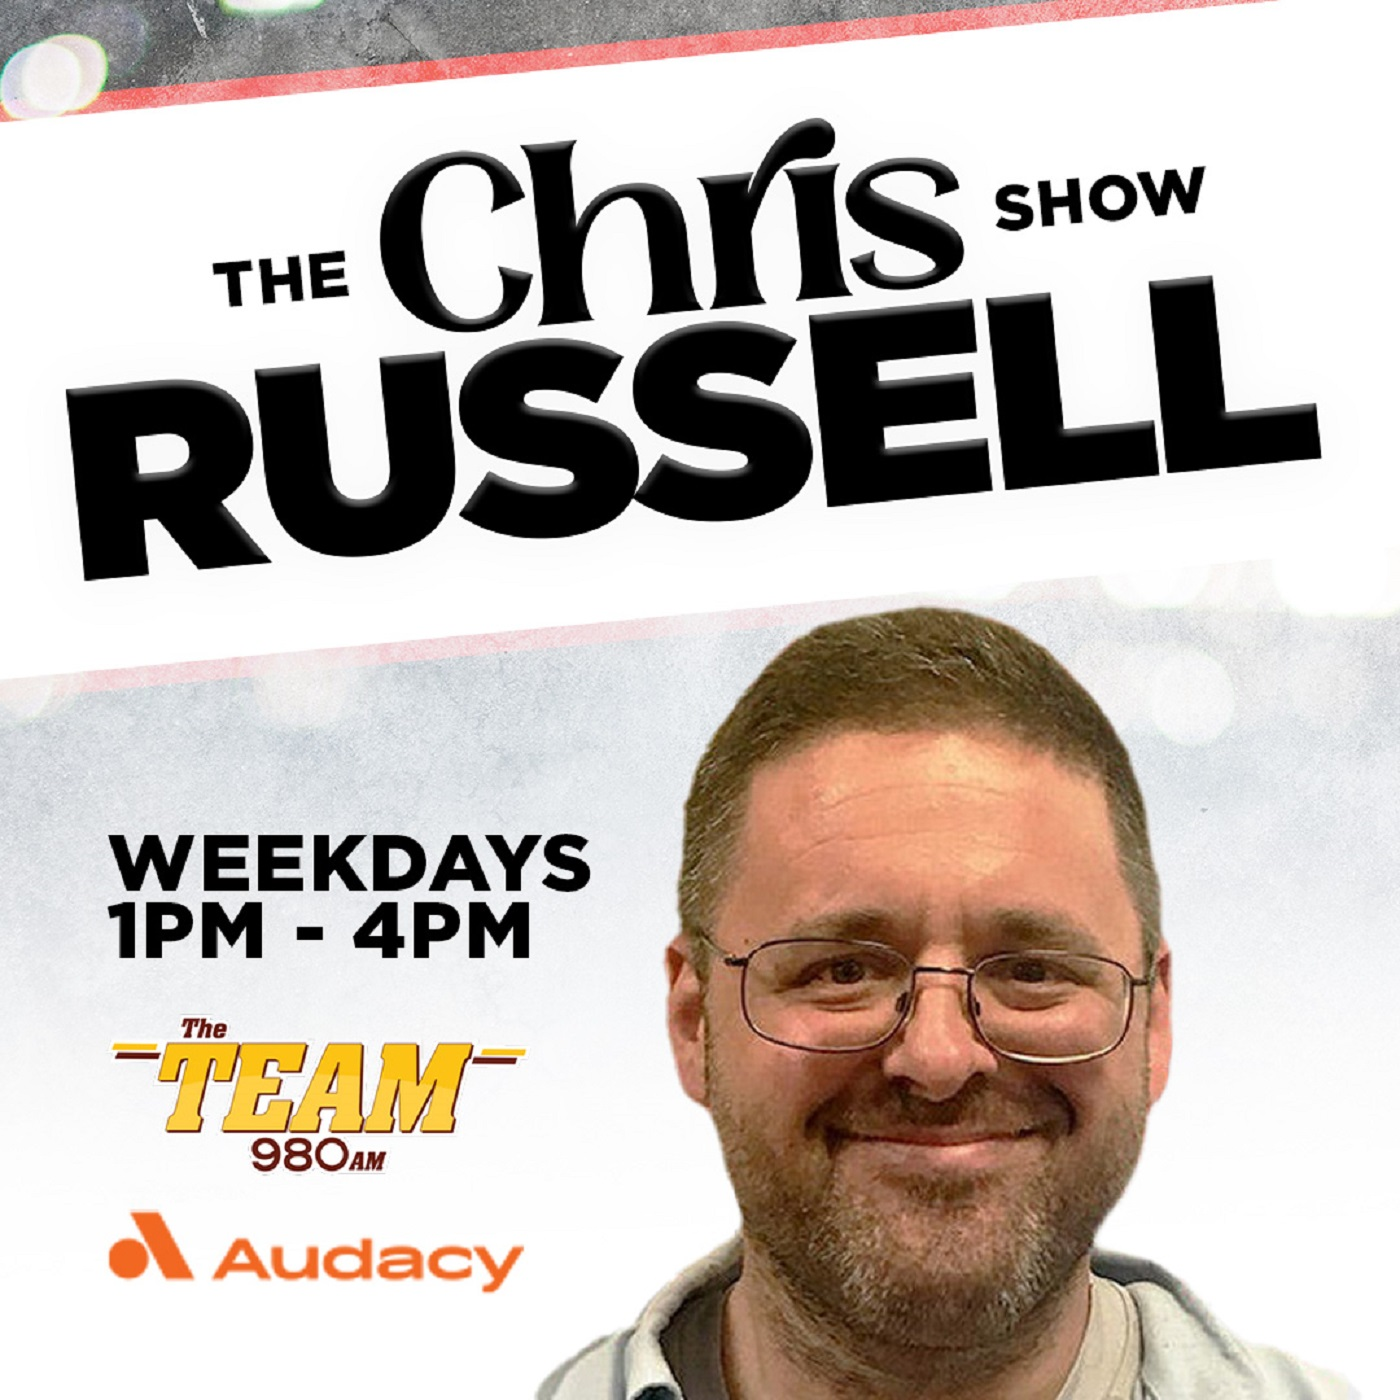 It's Opening Day!!! Chris Russell previews the Nats season